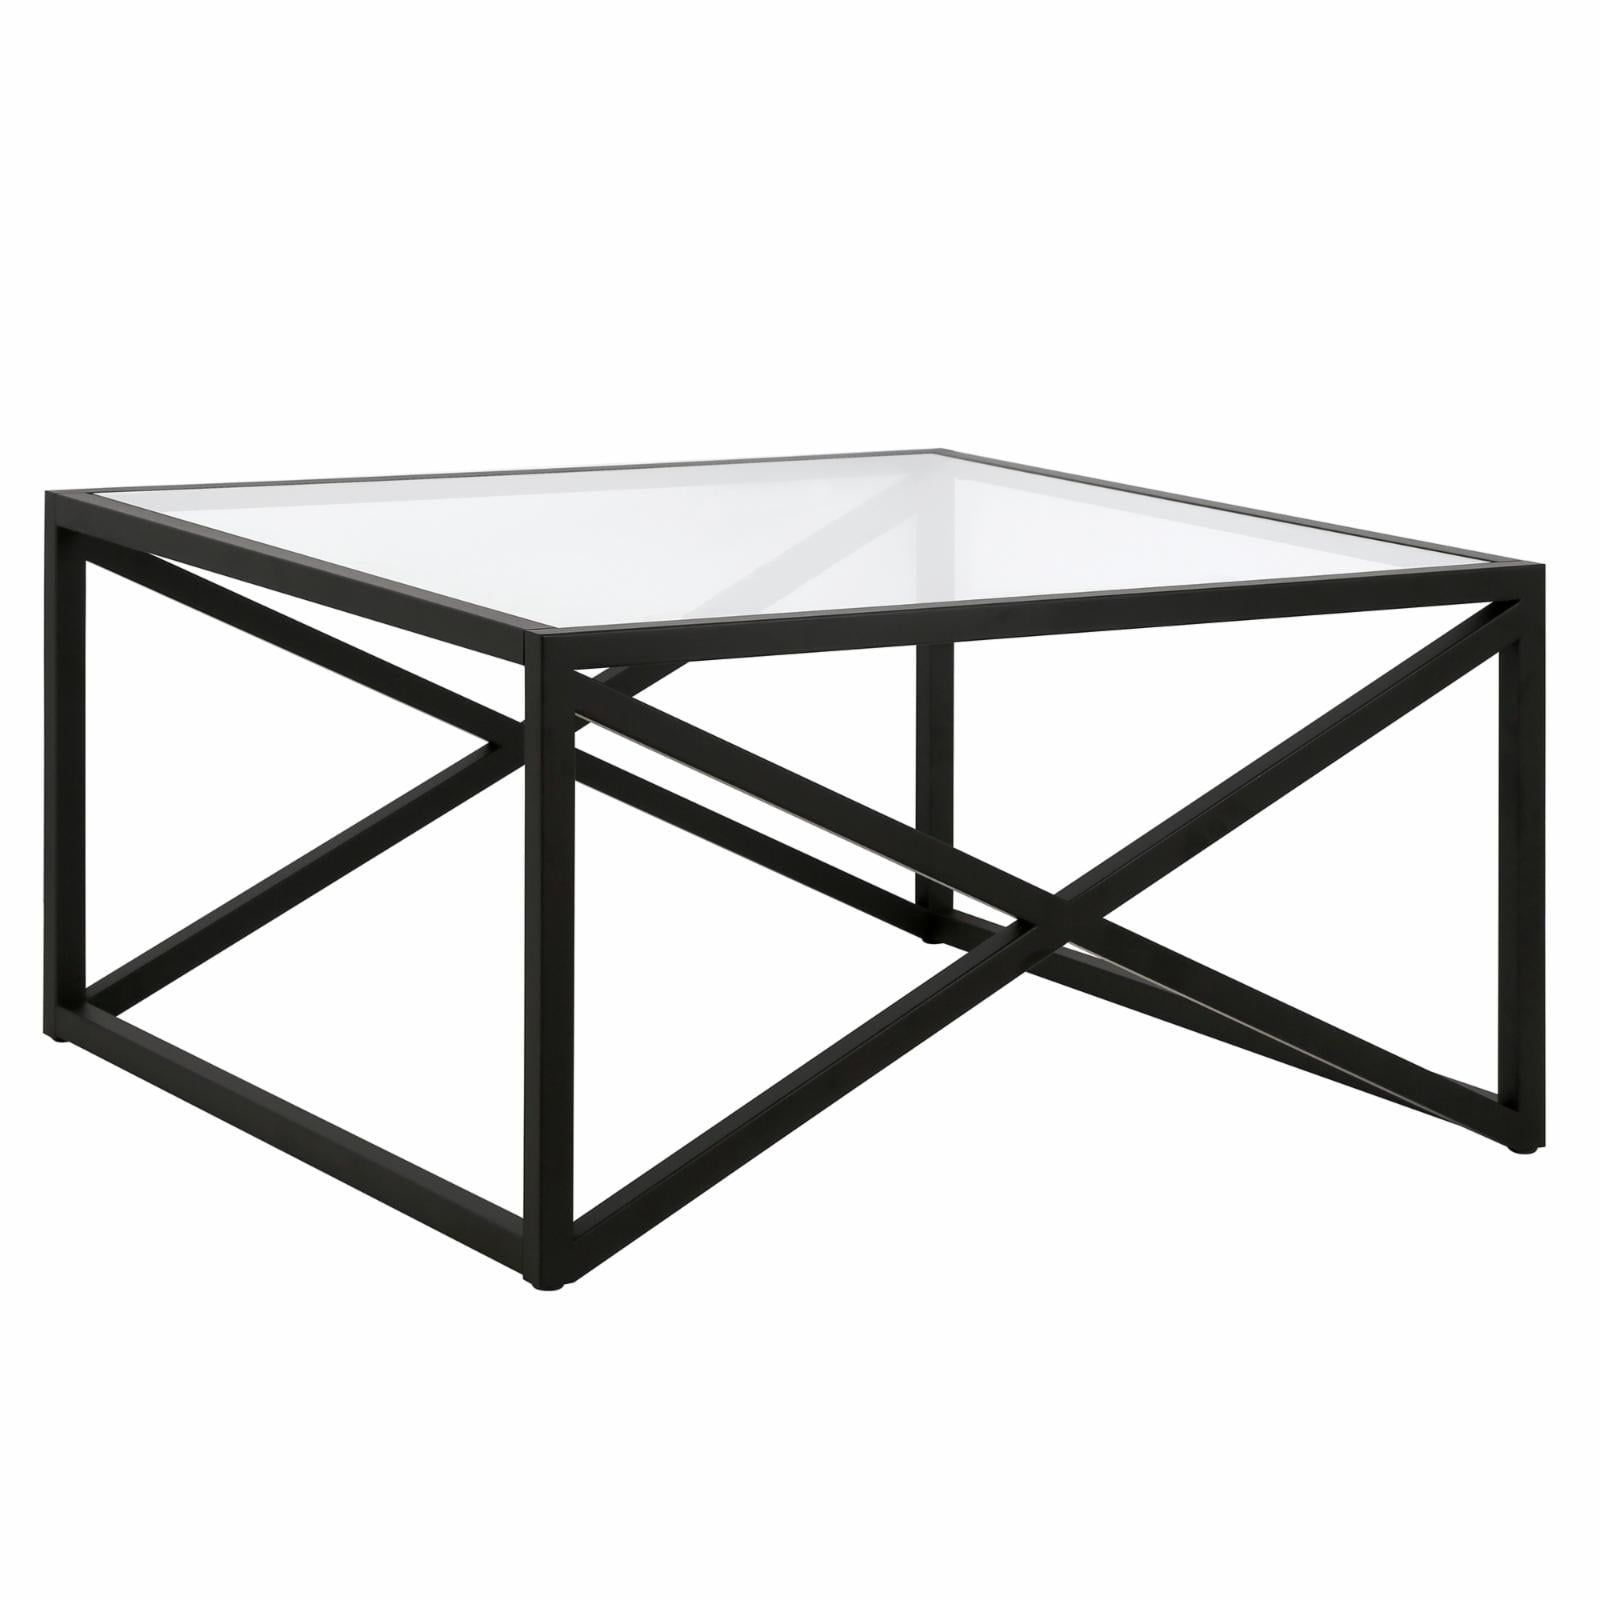 Featured Photo of 20 Best Collection of Addison&lane Calix Square Tables